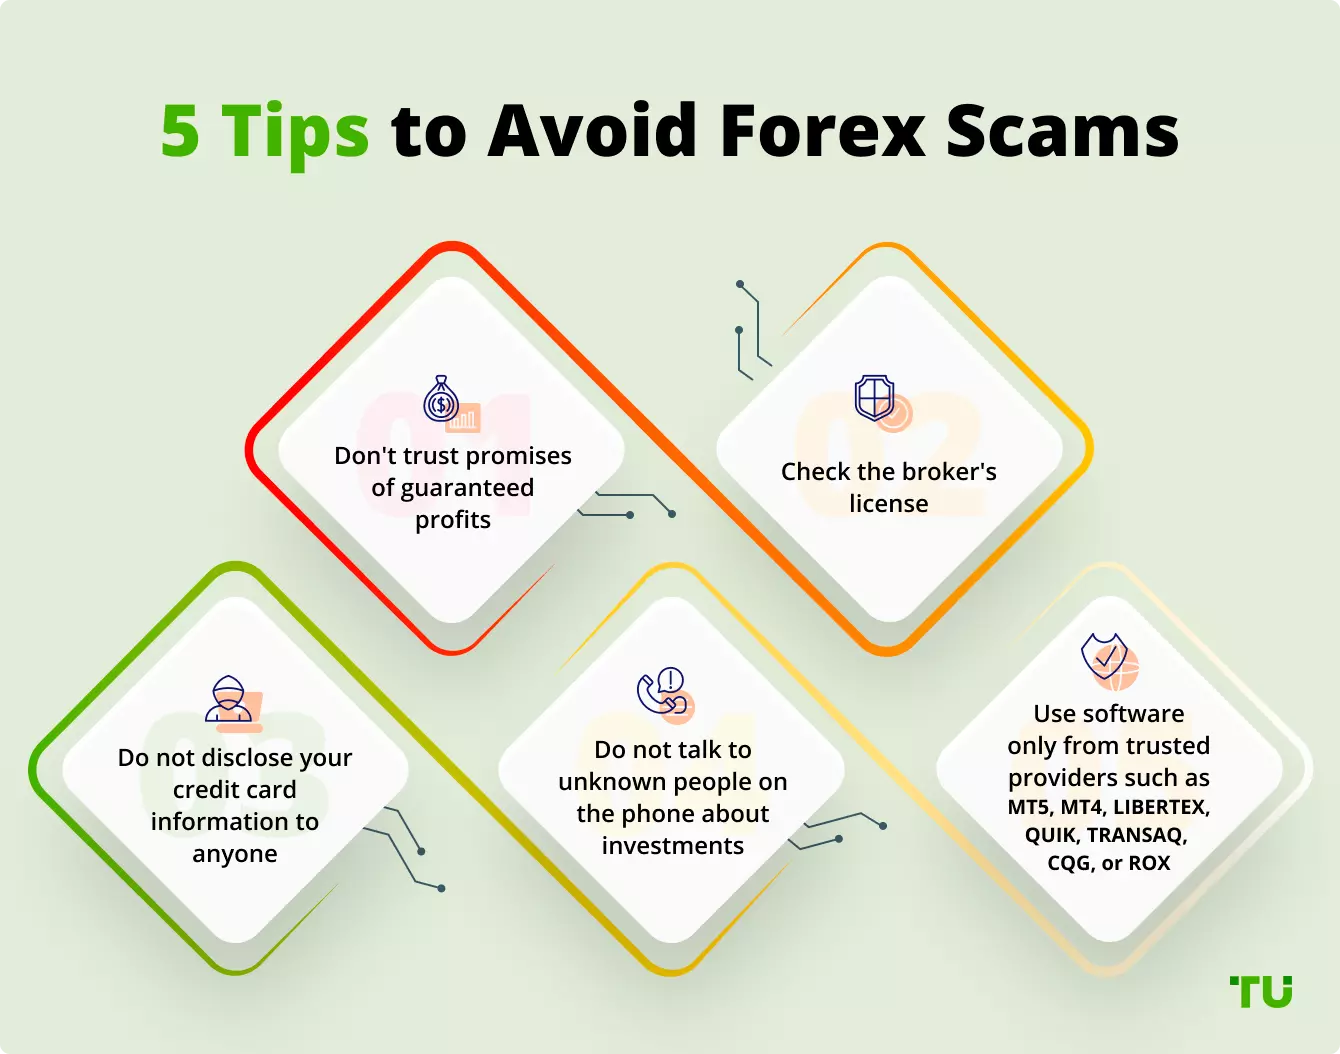 5 Tips to Avoid Forex Scams